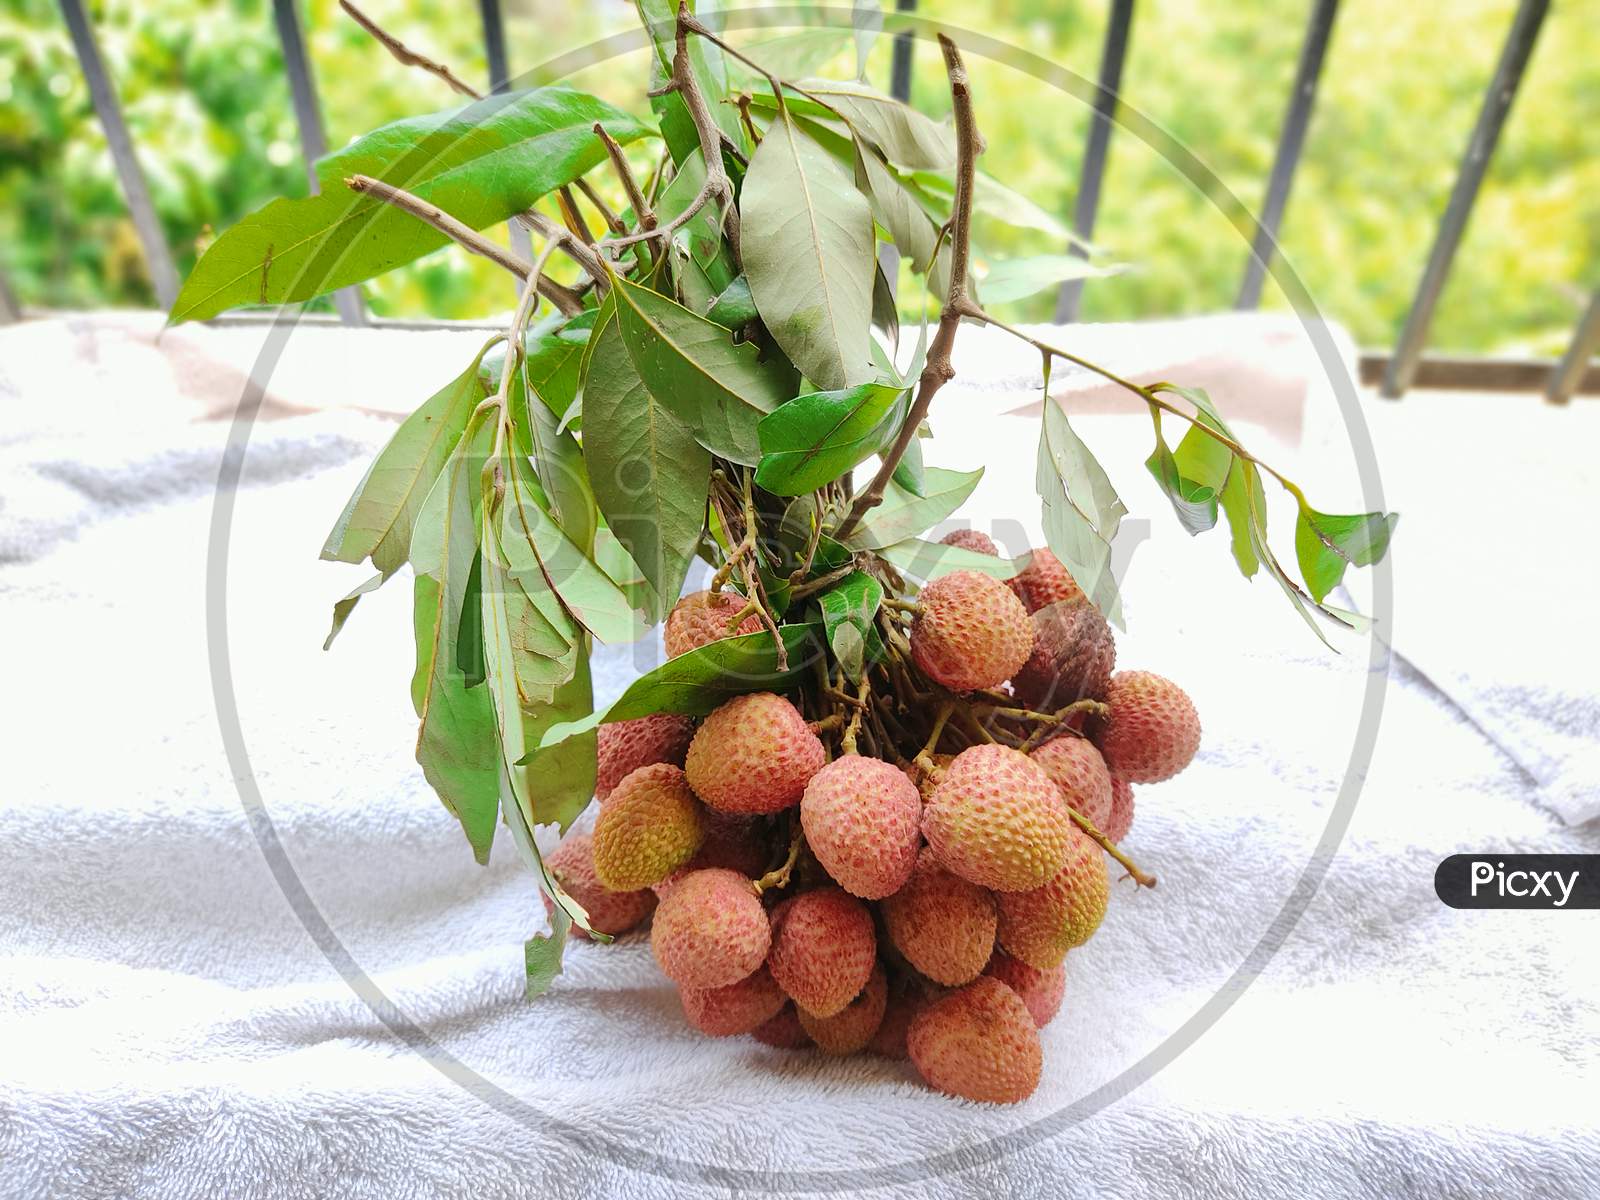 lychee plucked and kept on white towel